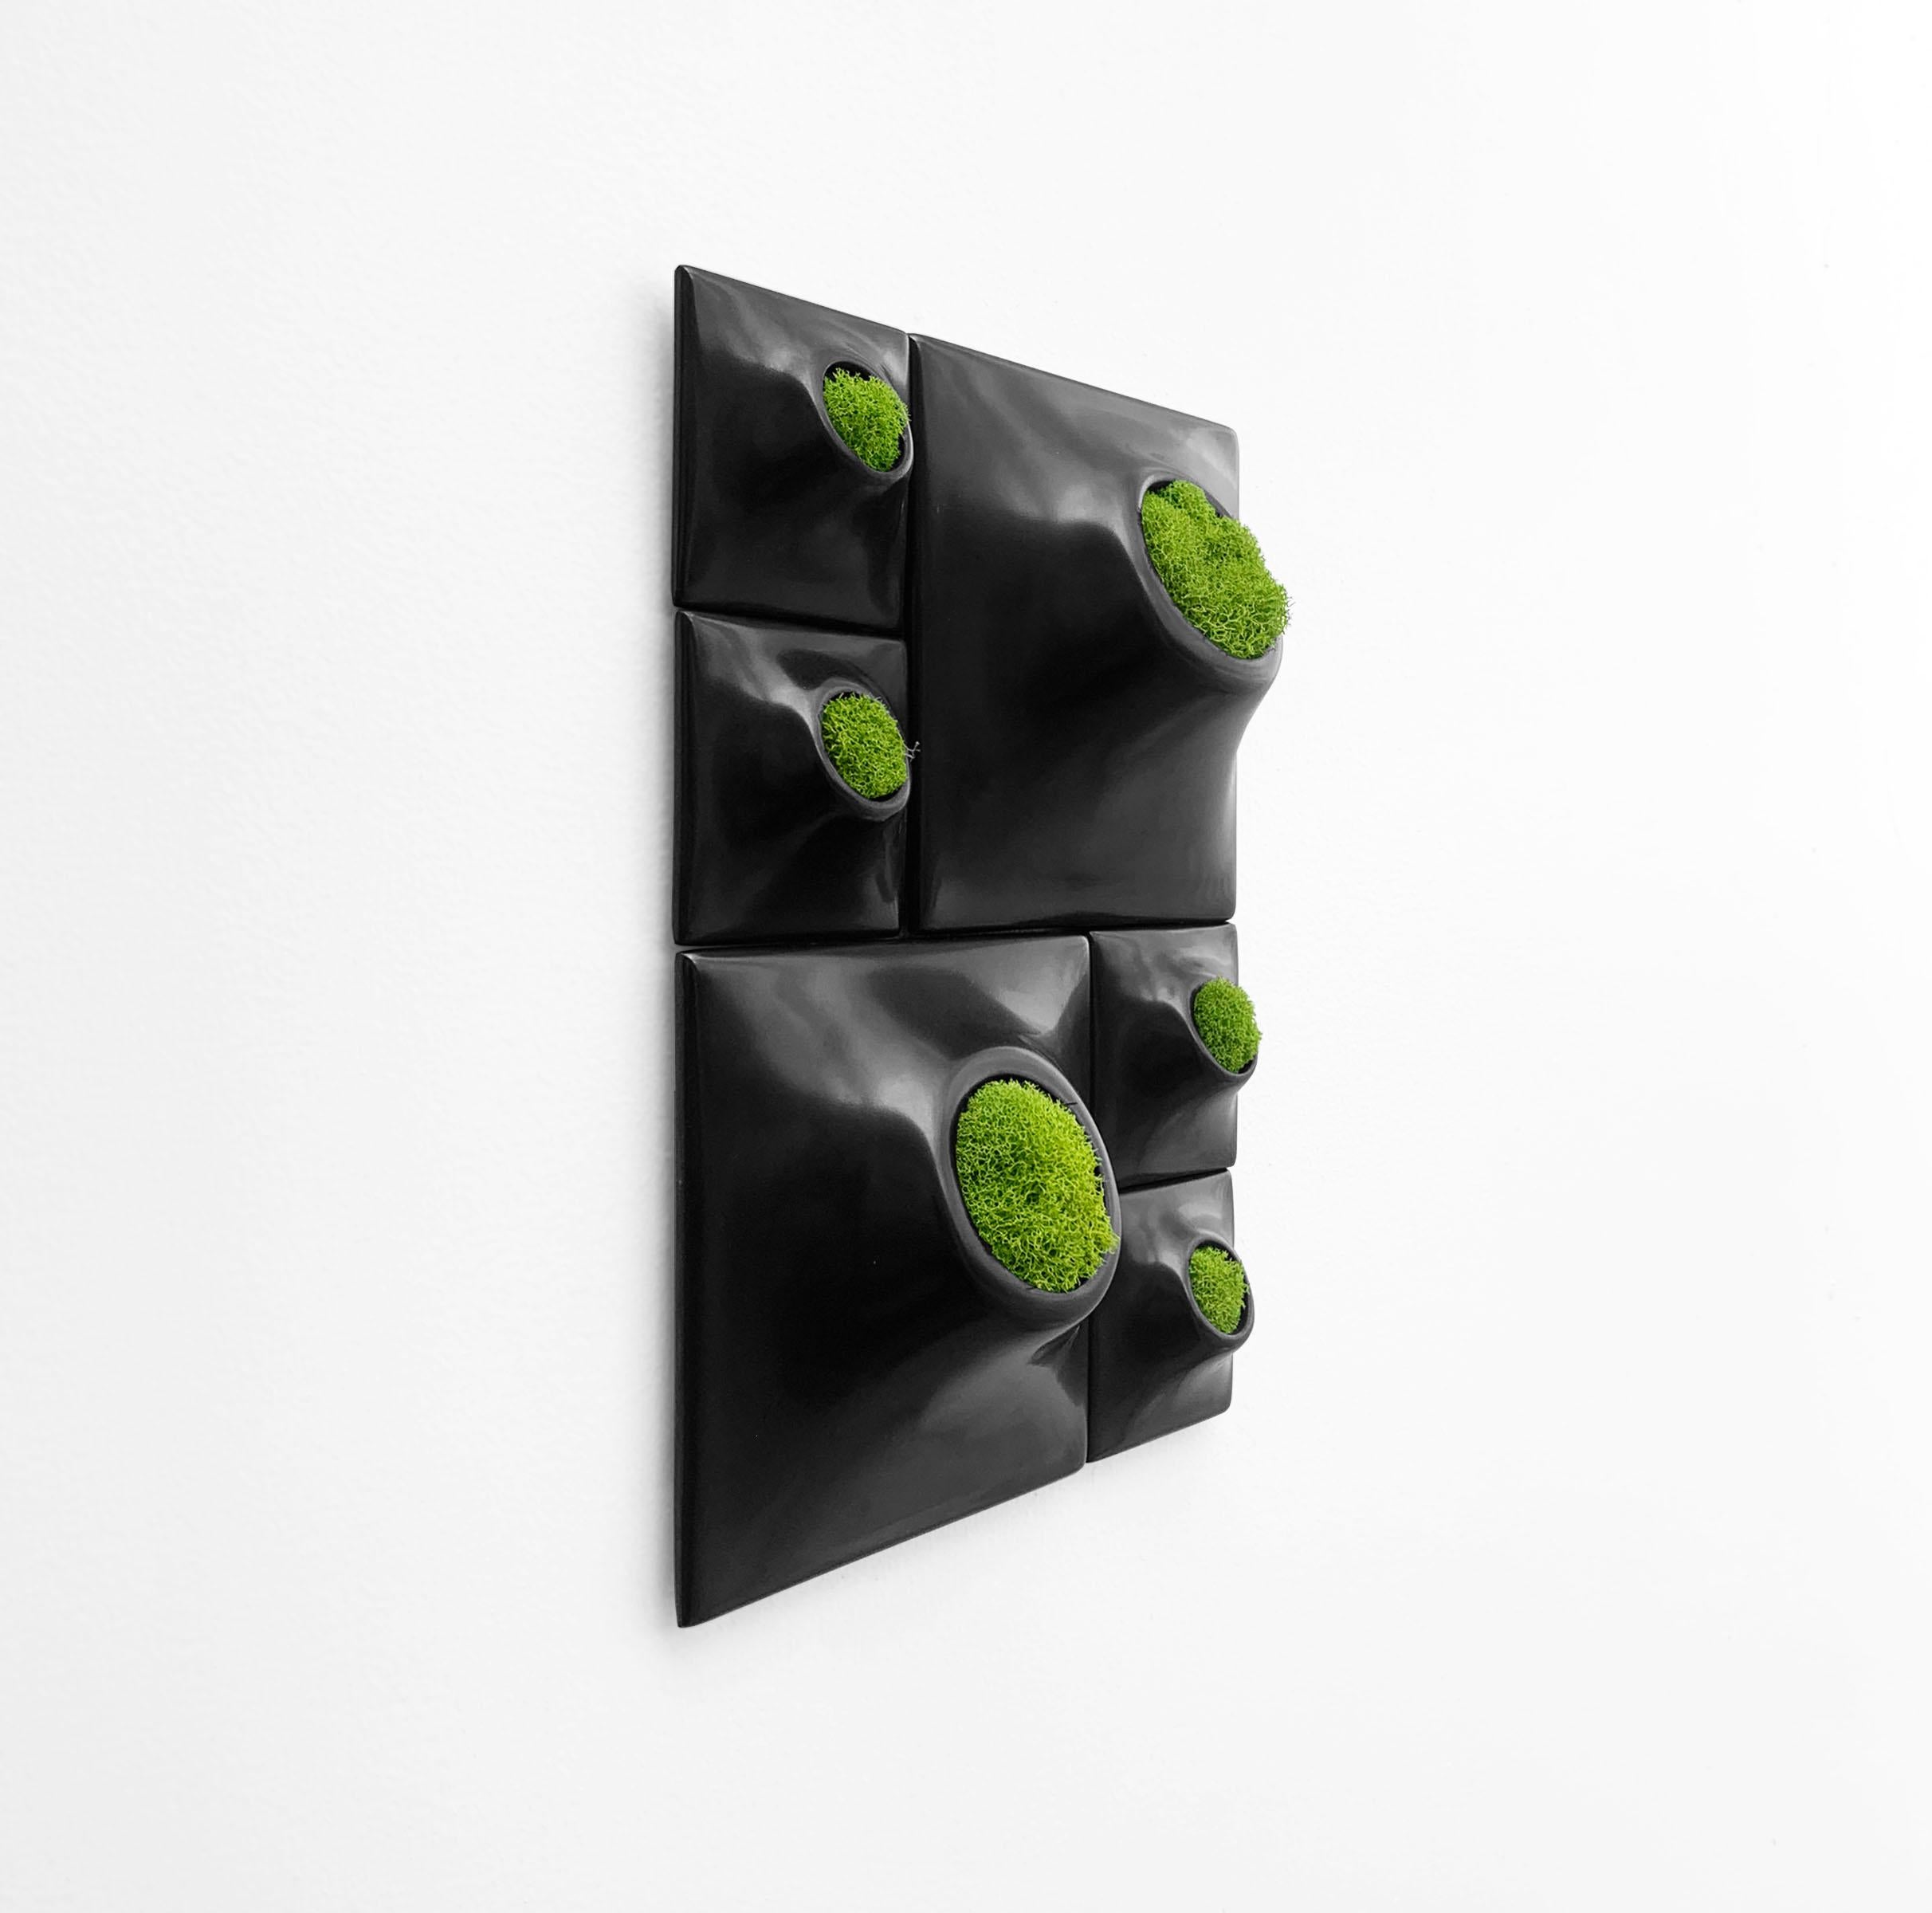 Modern Black Wall Planter Set, Living Wall Sculpture, Moss Wall Art, Node BR2 In New Condition For Sale In Bridgeport, PA